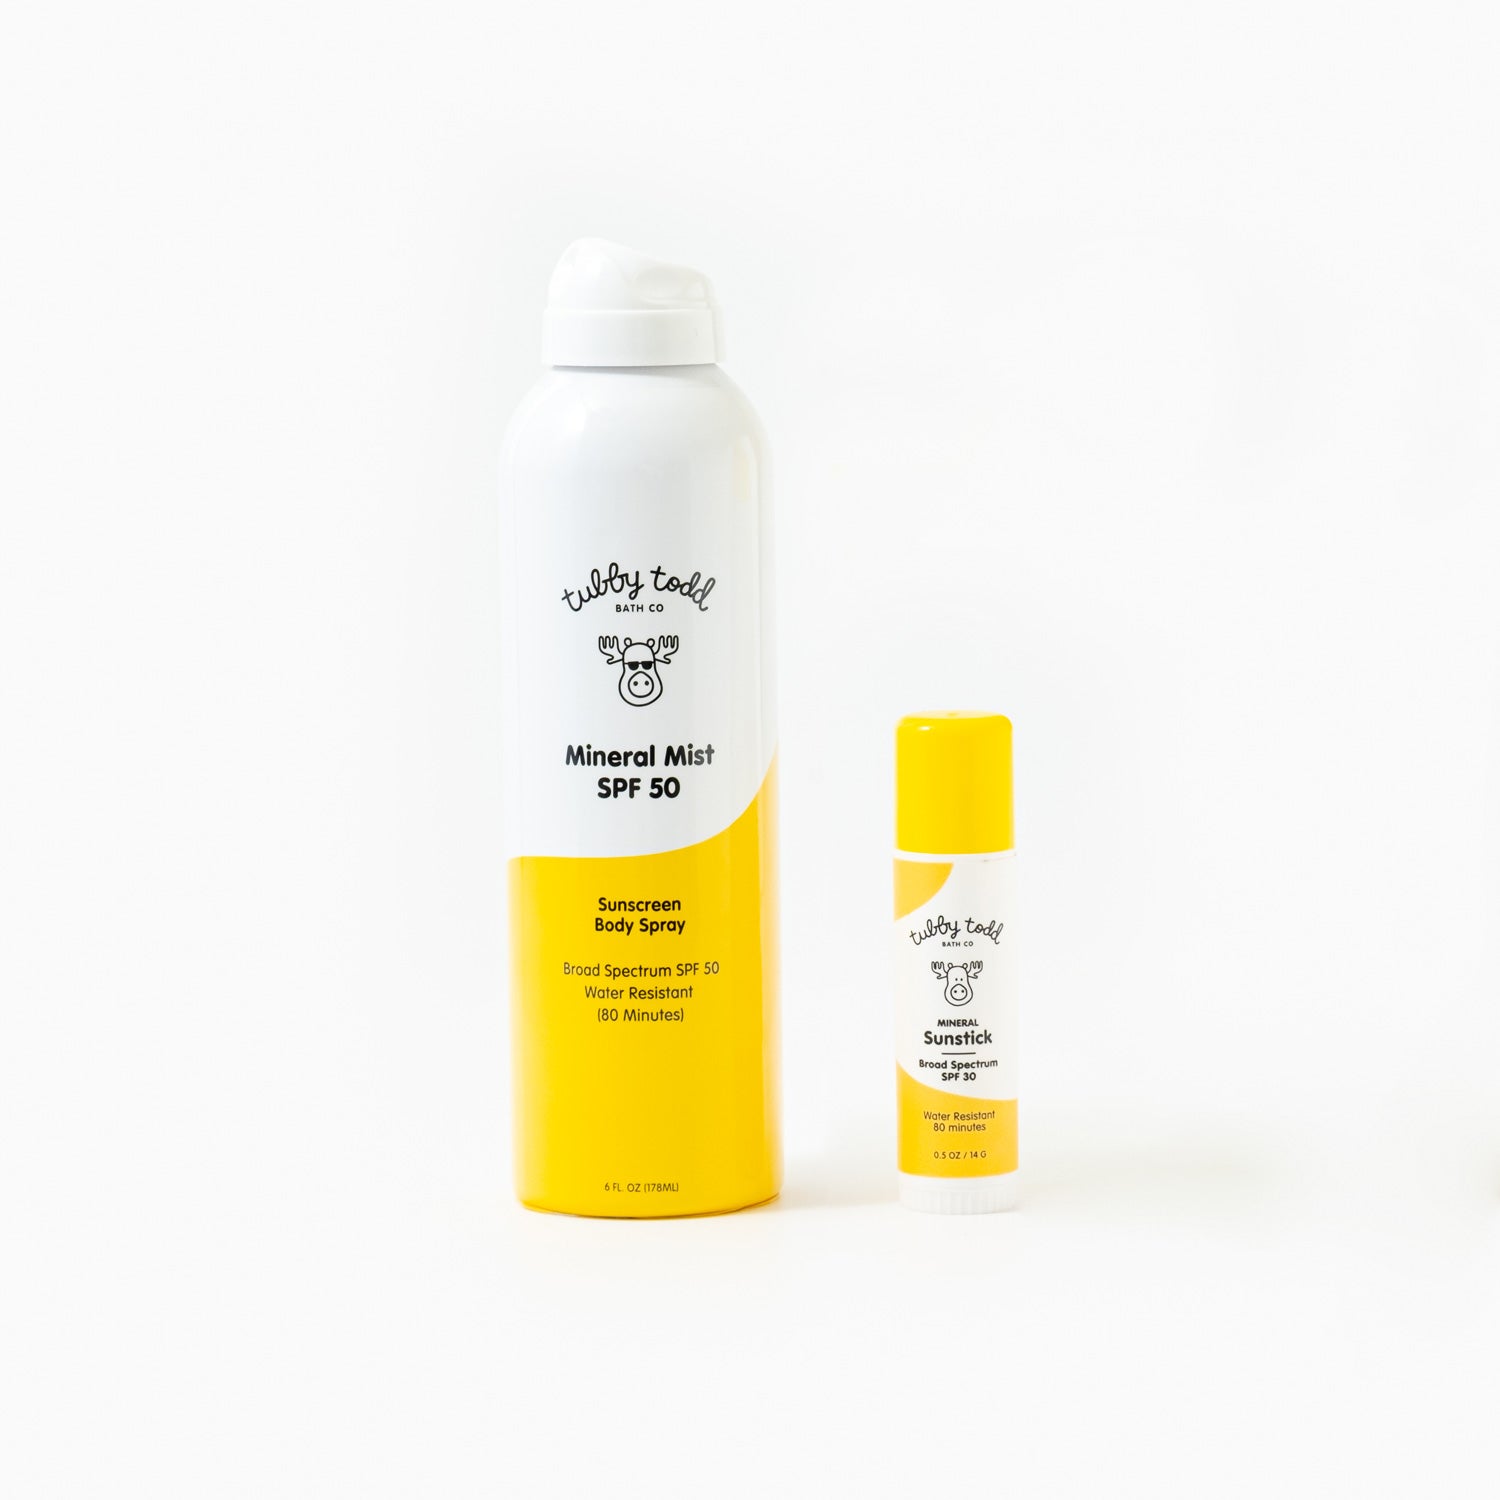 Mineral Mist and Mineral Sunstick bottles next to each other on white background